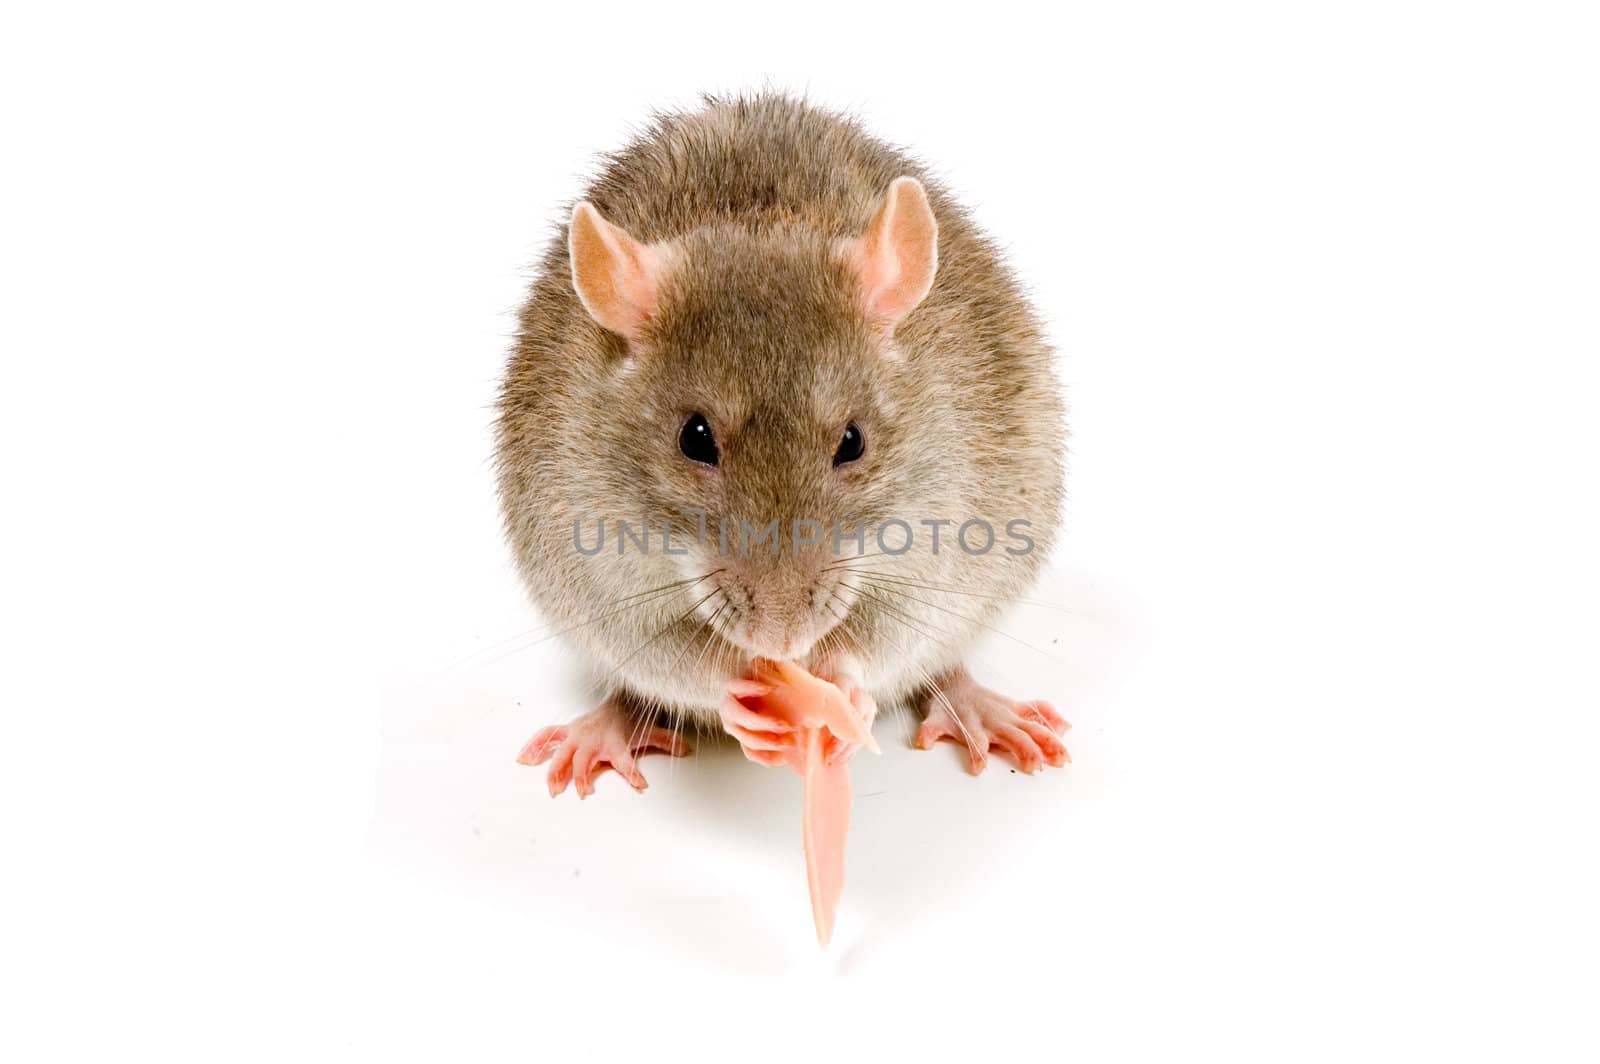 Brown Rat eating meat in front of a white background by ladyminnie